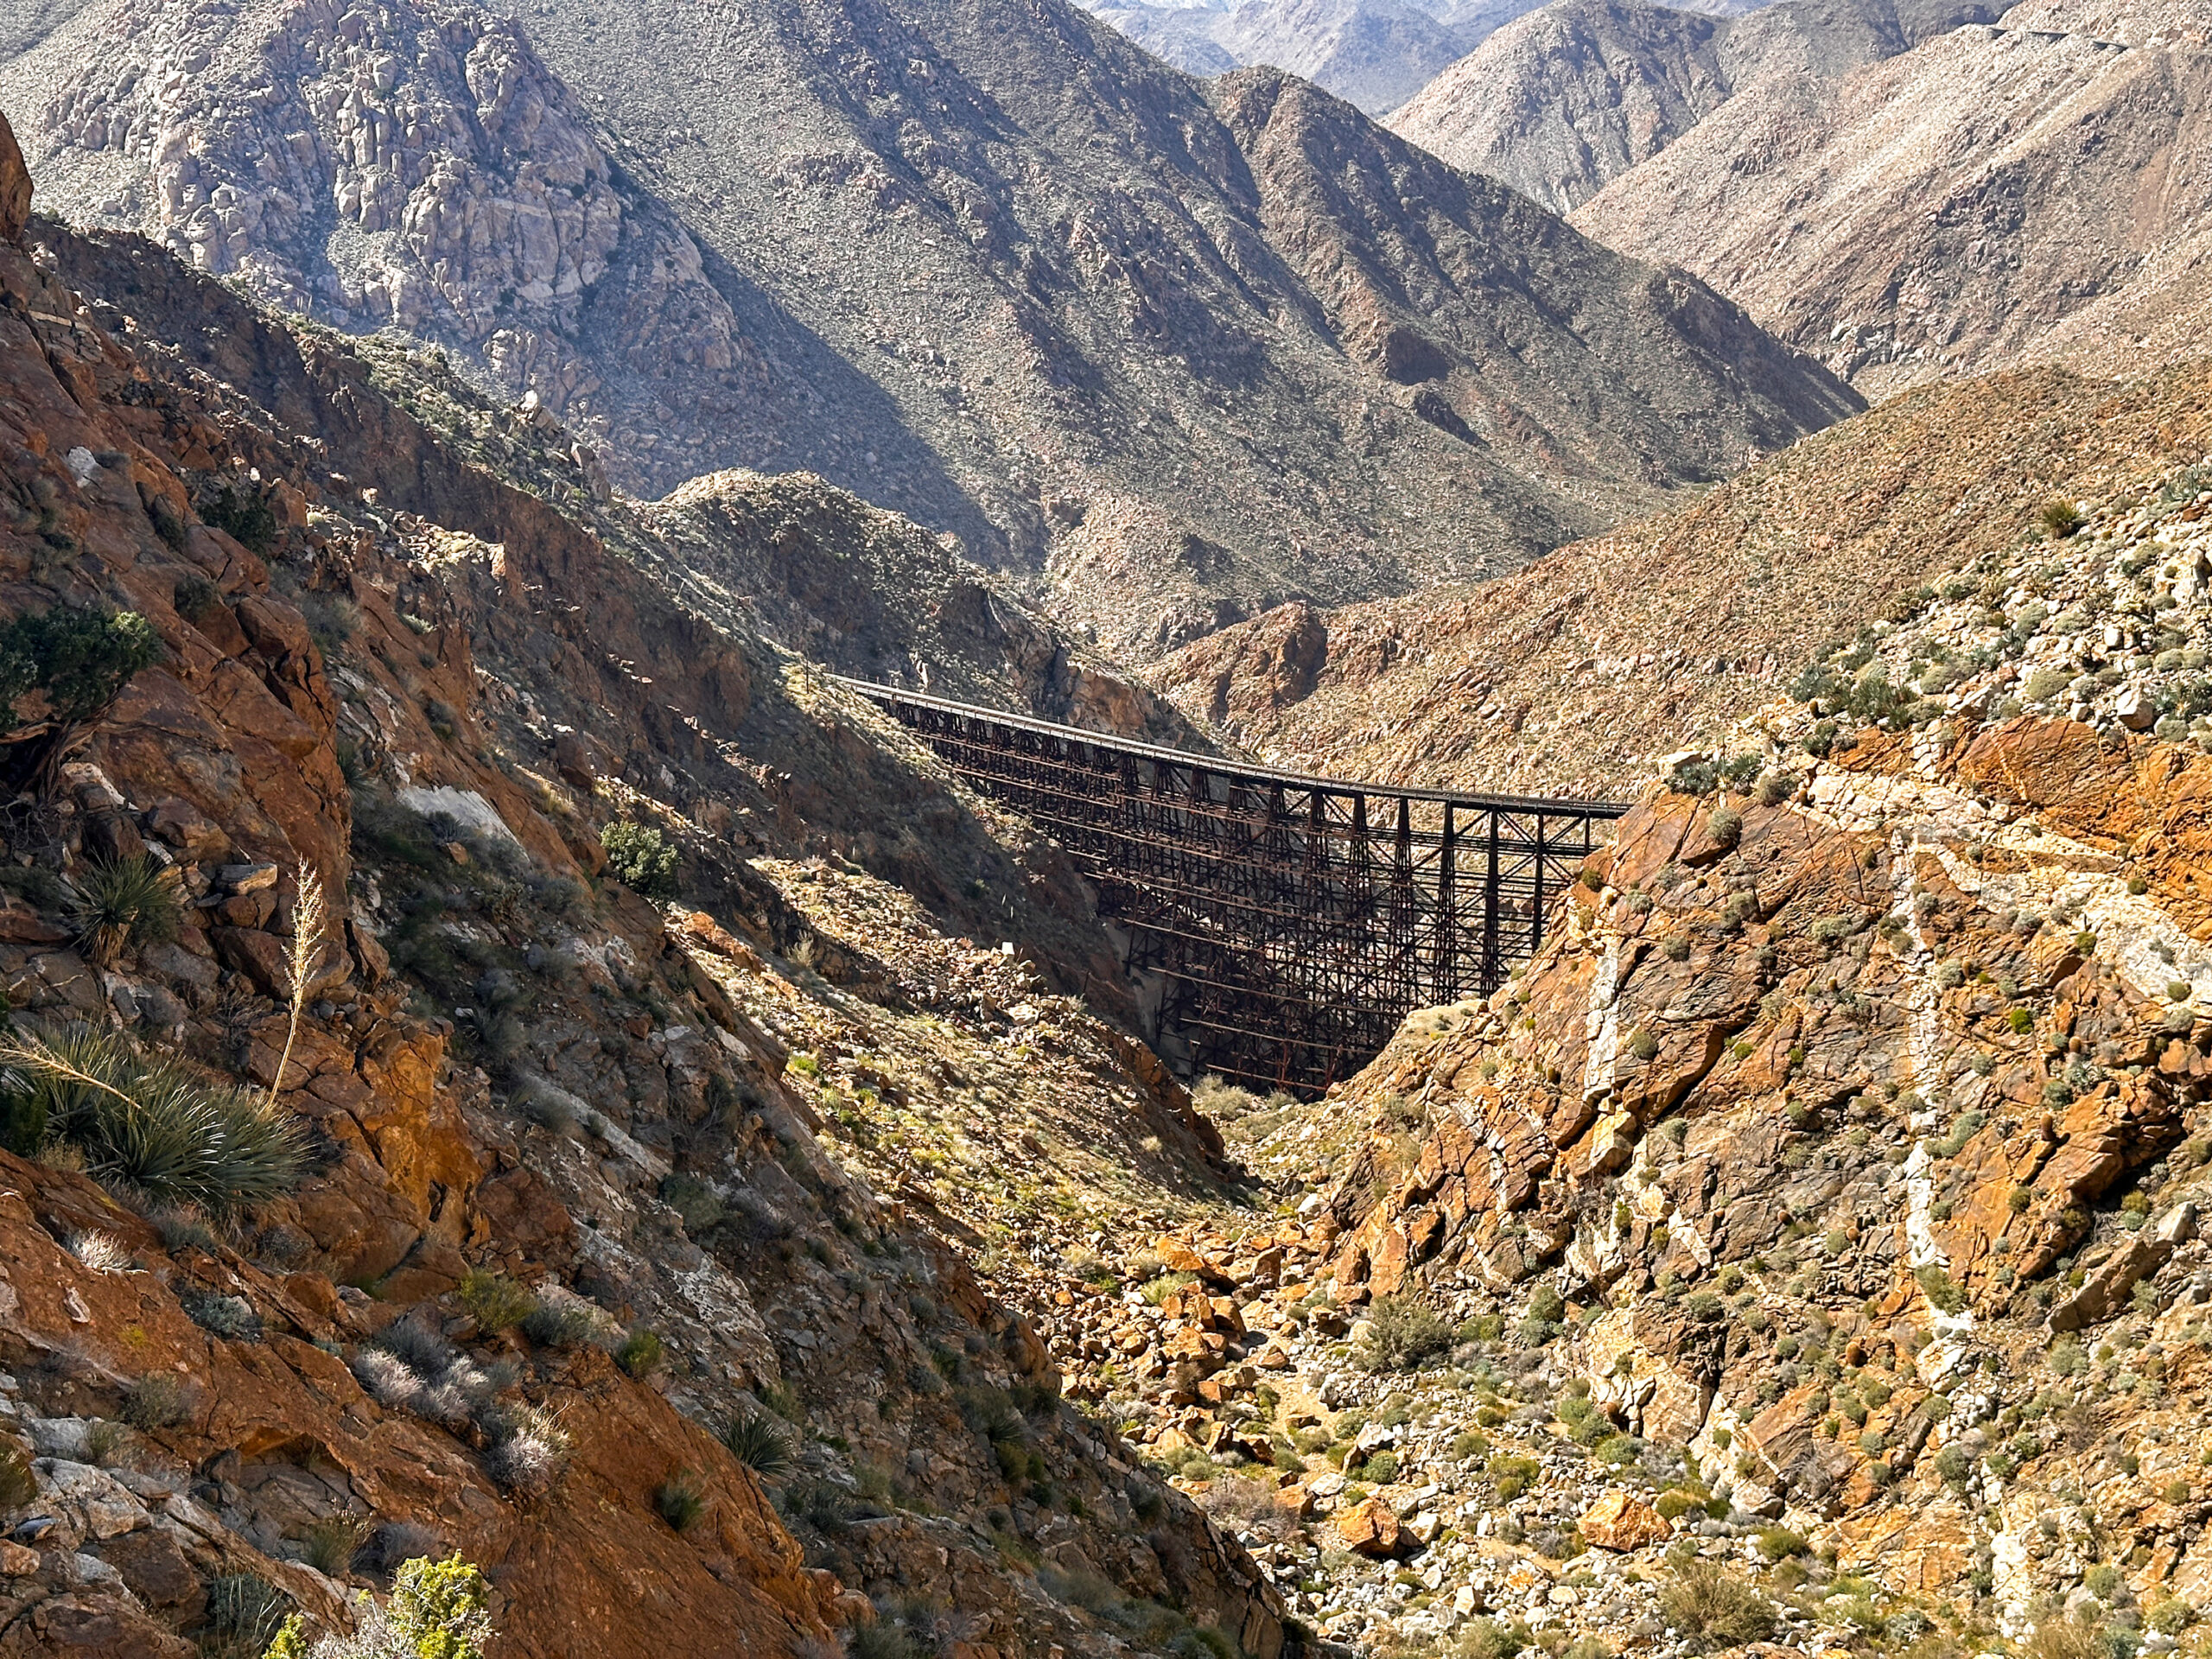 View coming down into the Goat Canyon from Mortero Palms